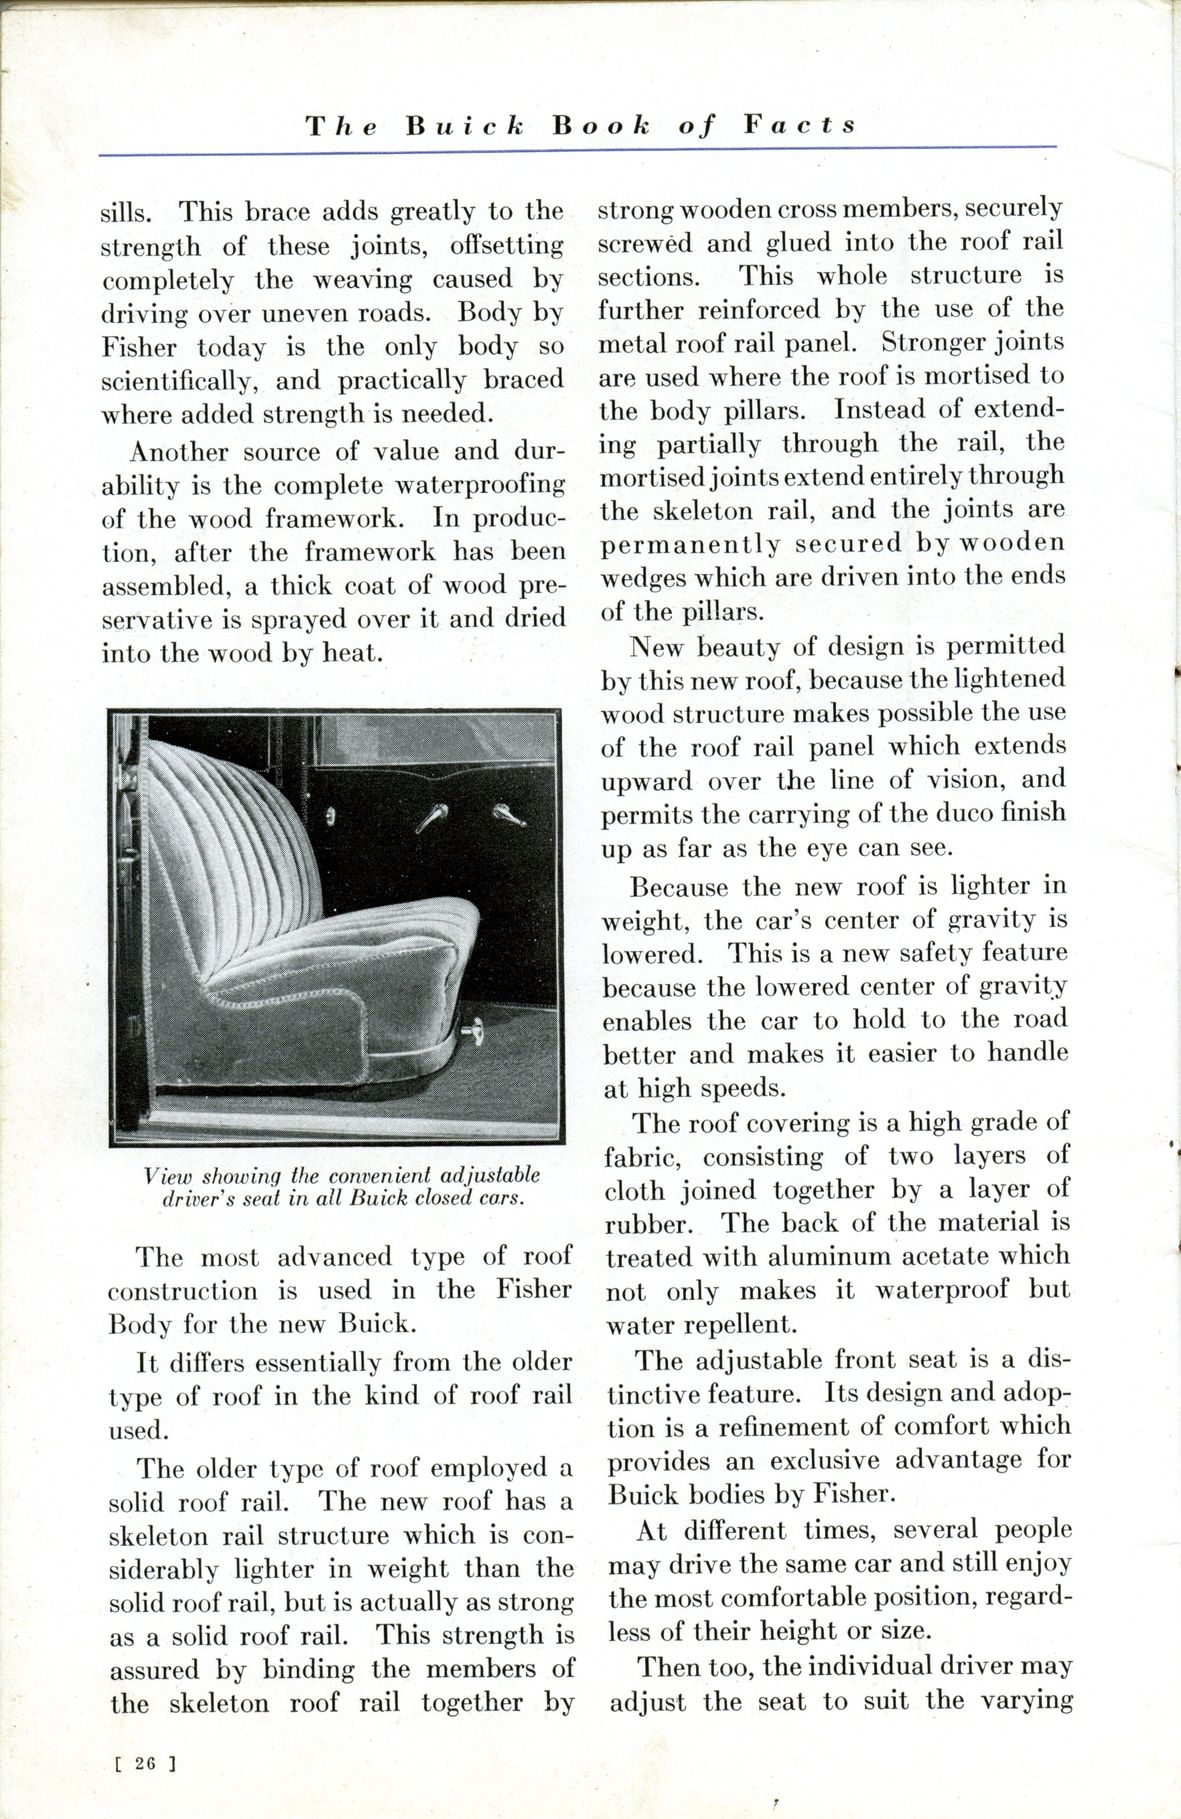 1930 Buick Book of Facts-26